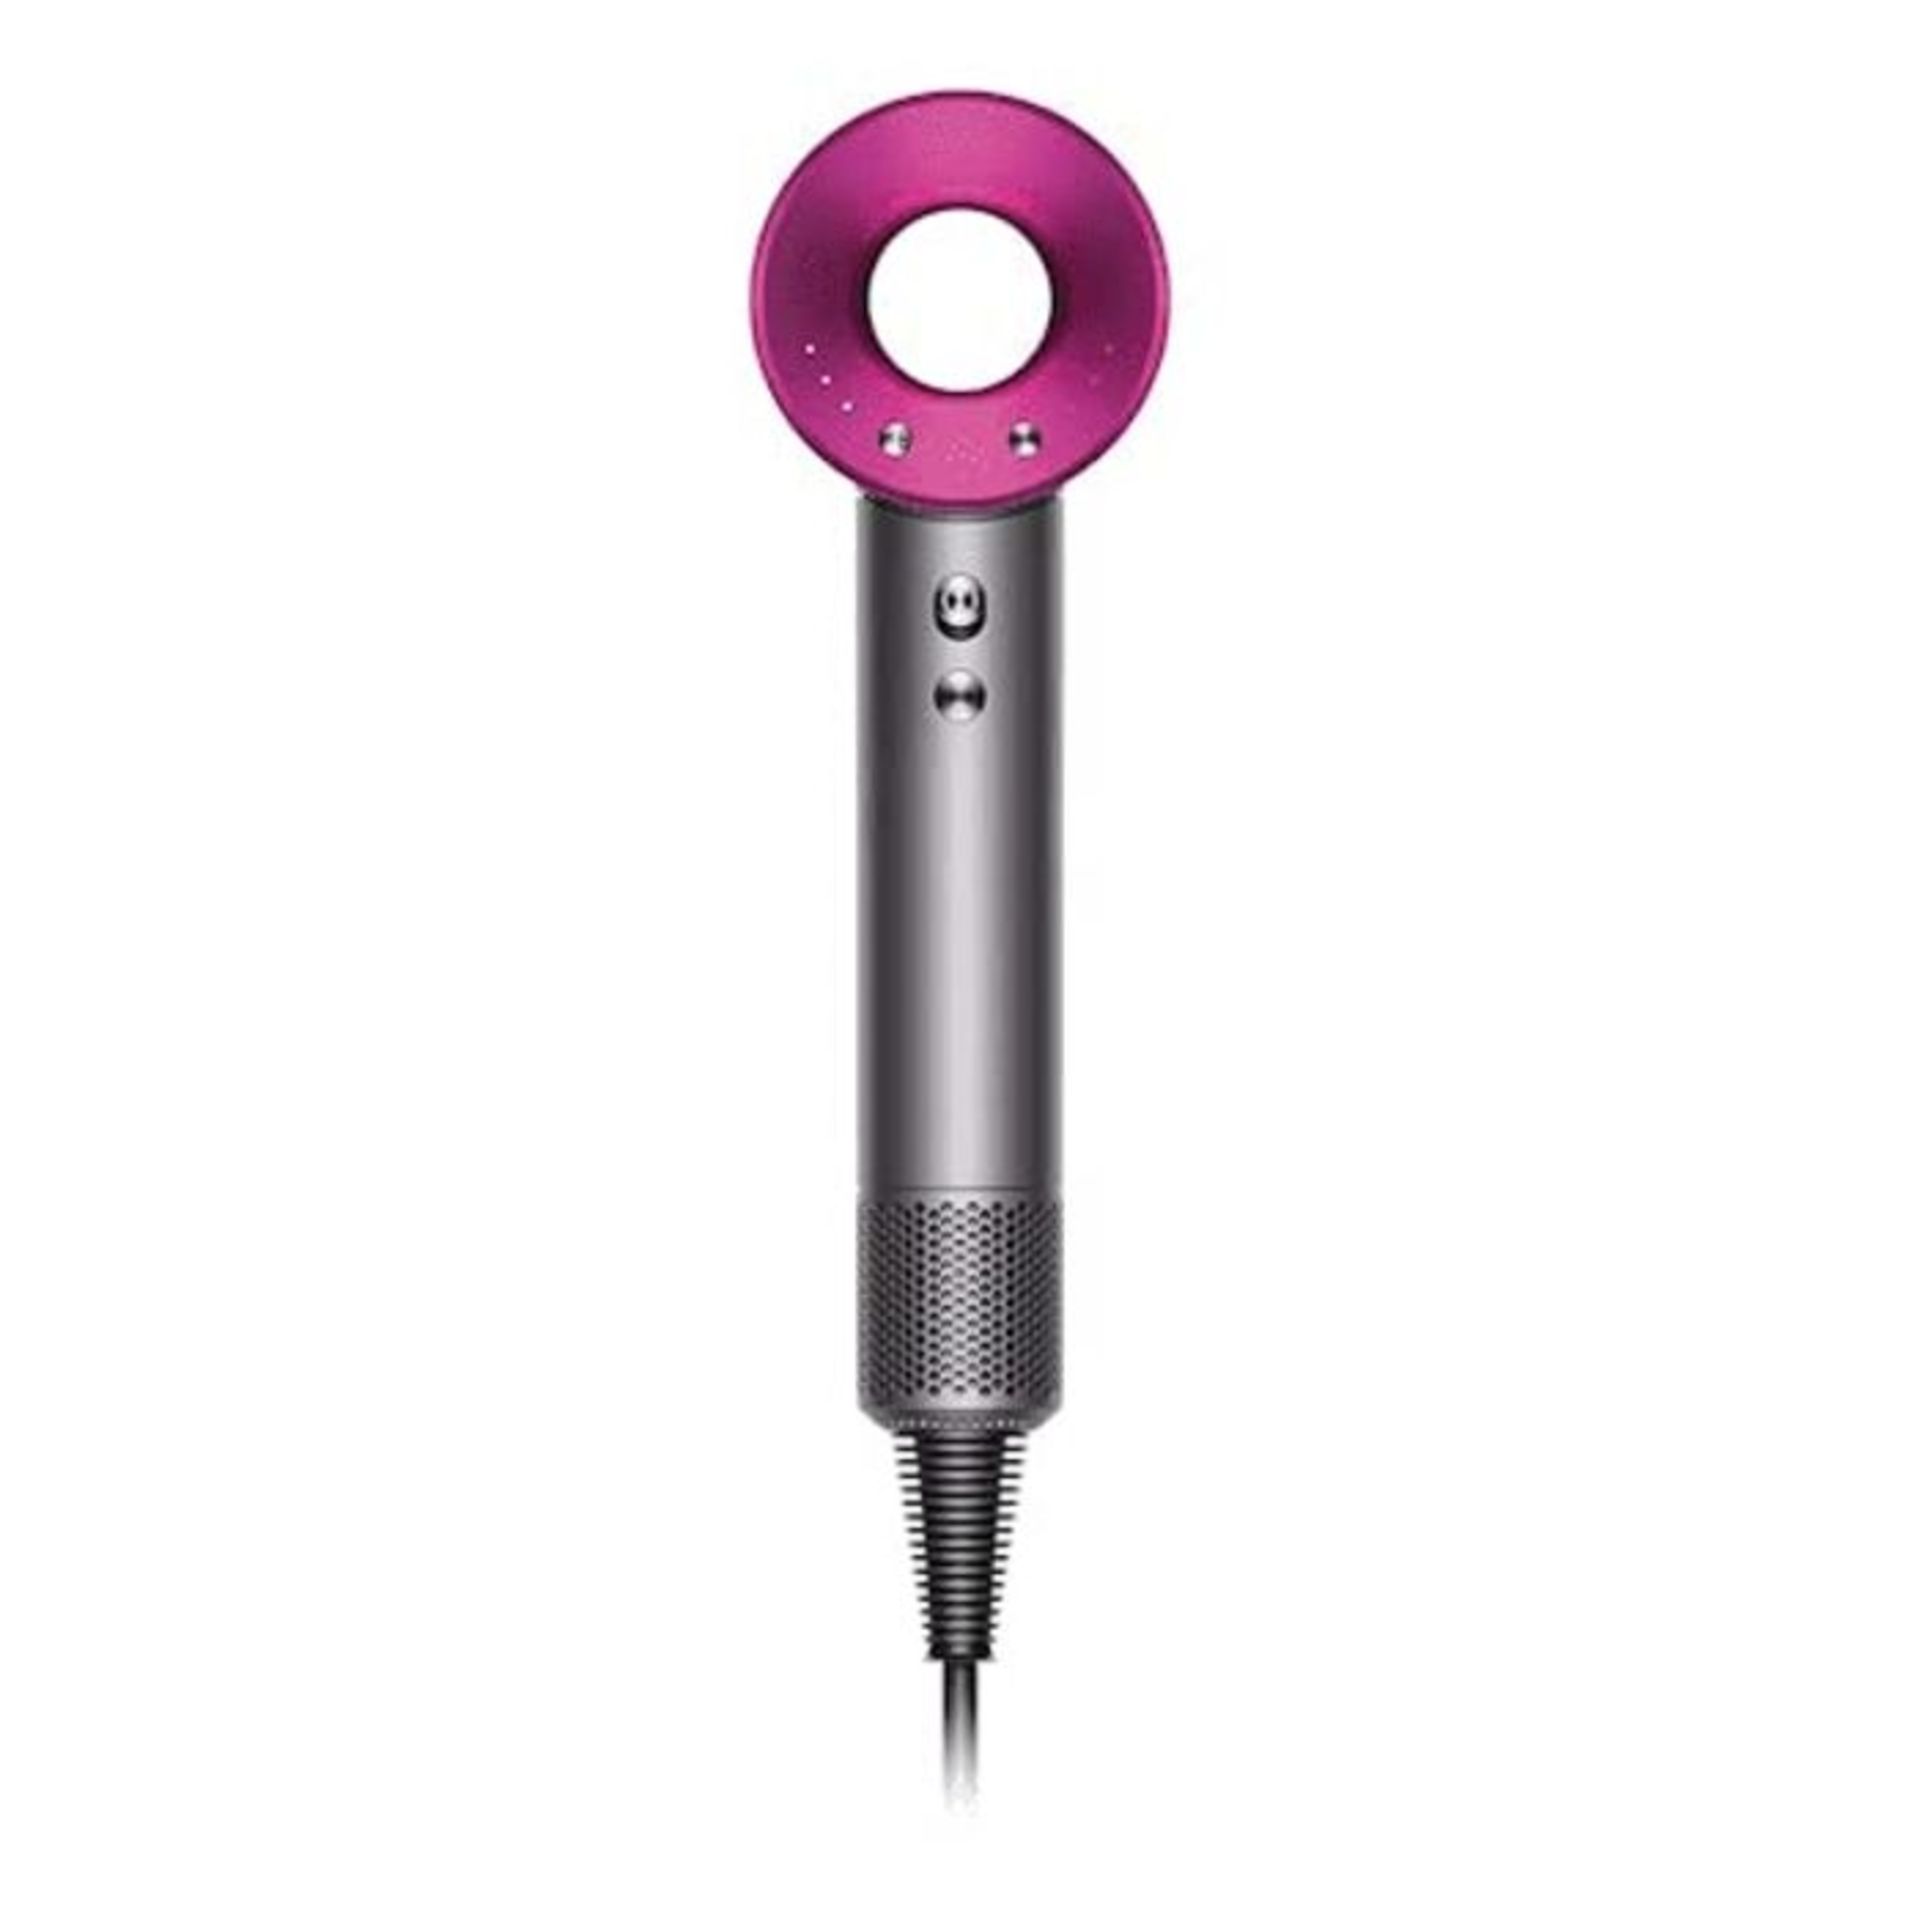 RRP £390.00 Dyson Hair Dryer, Iron/Fuchsia, 1200W [MISSING BUTTONS]